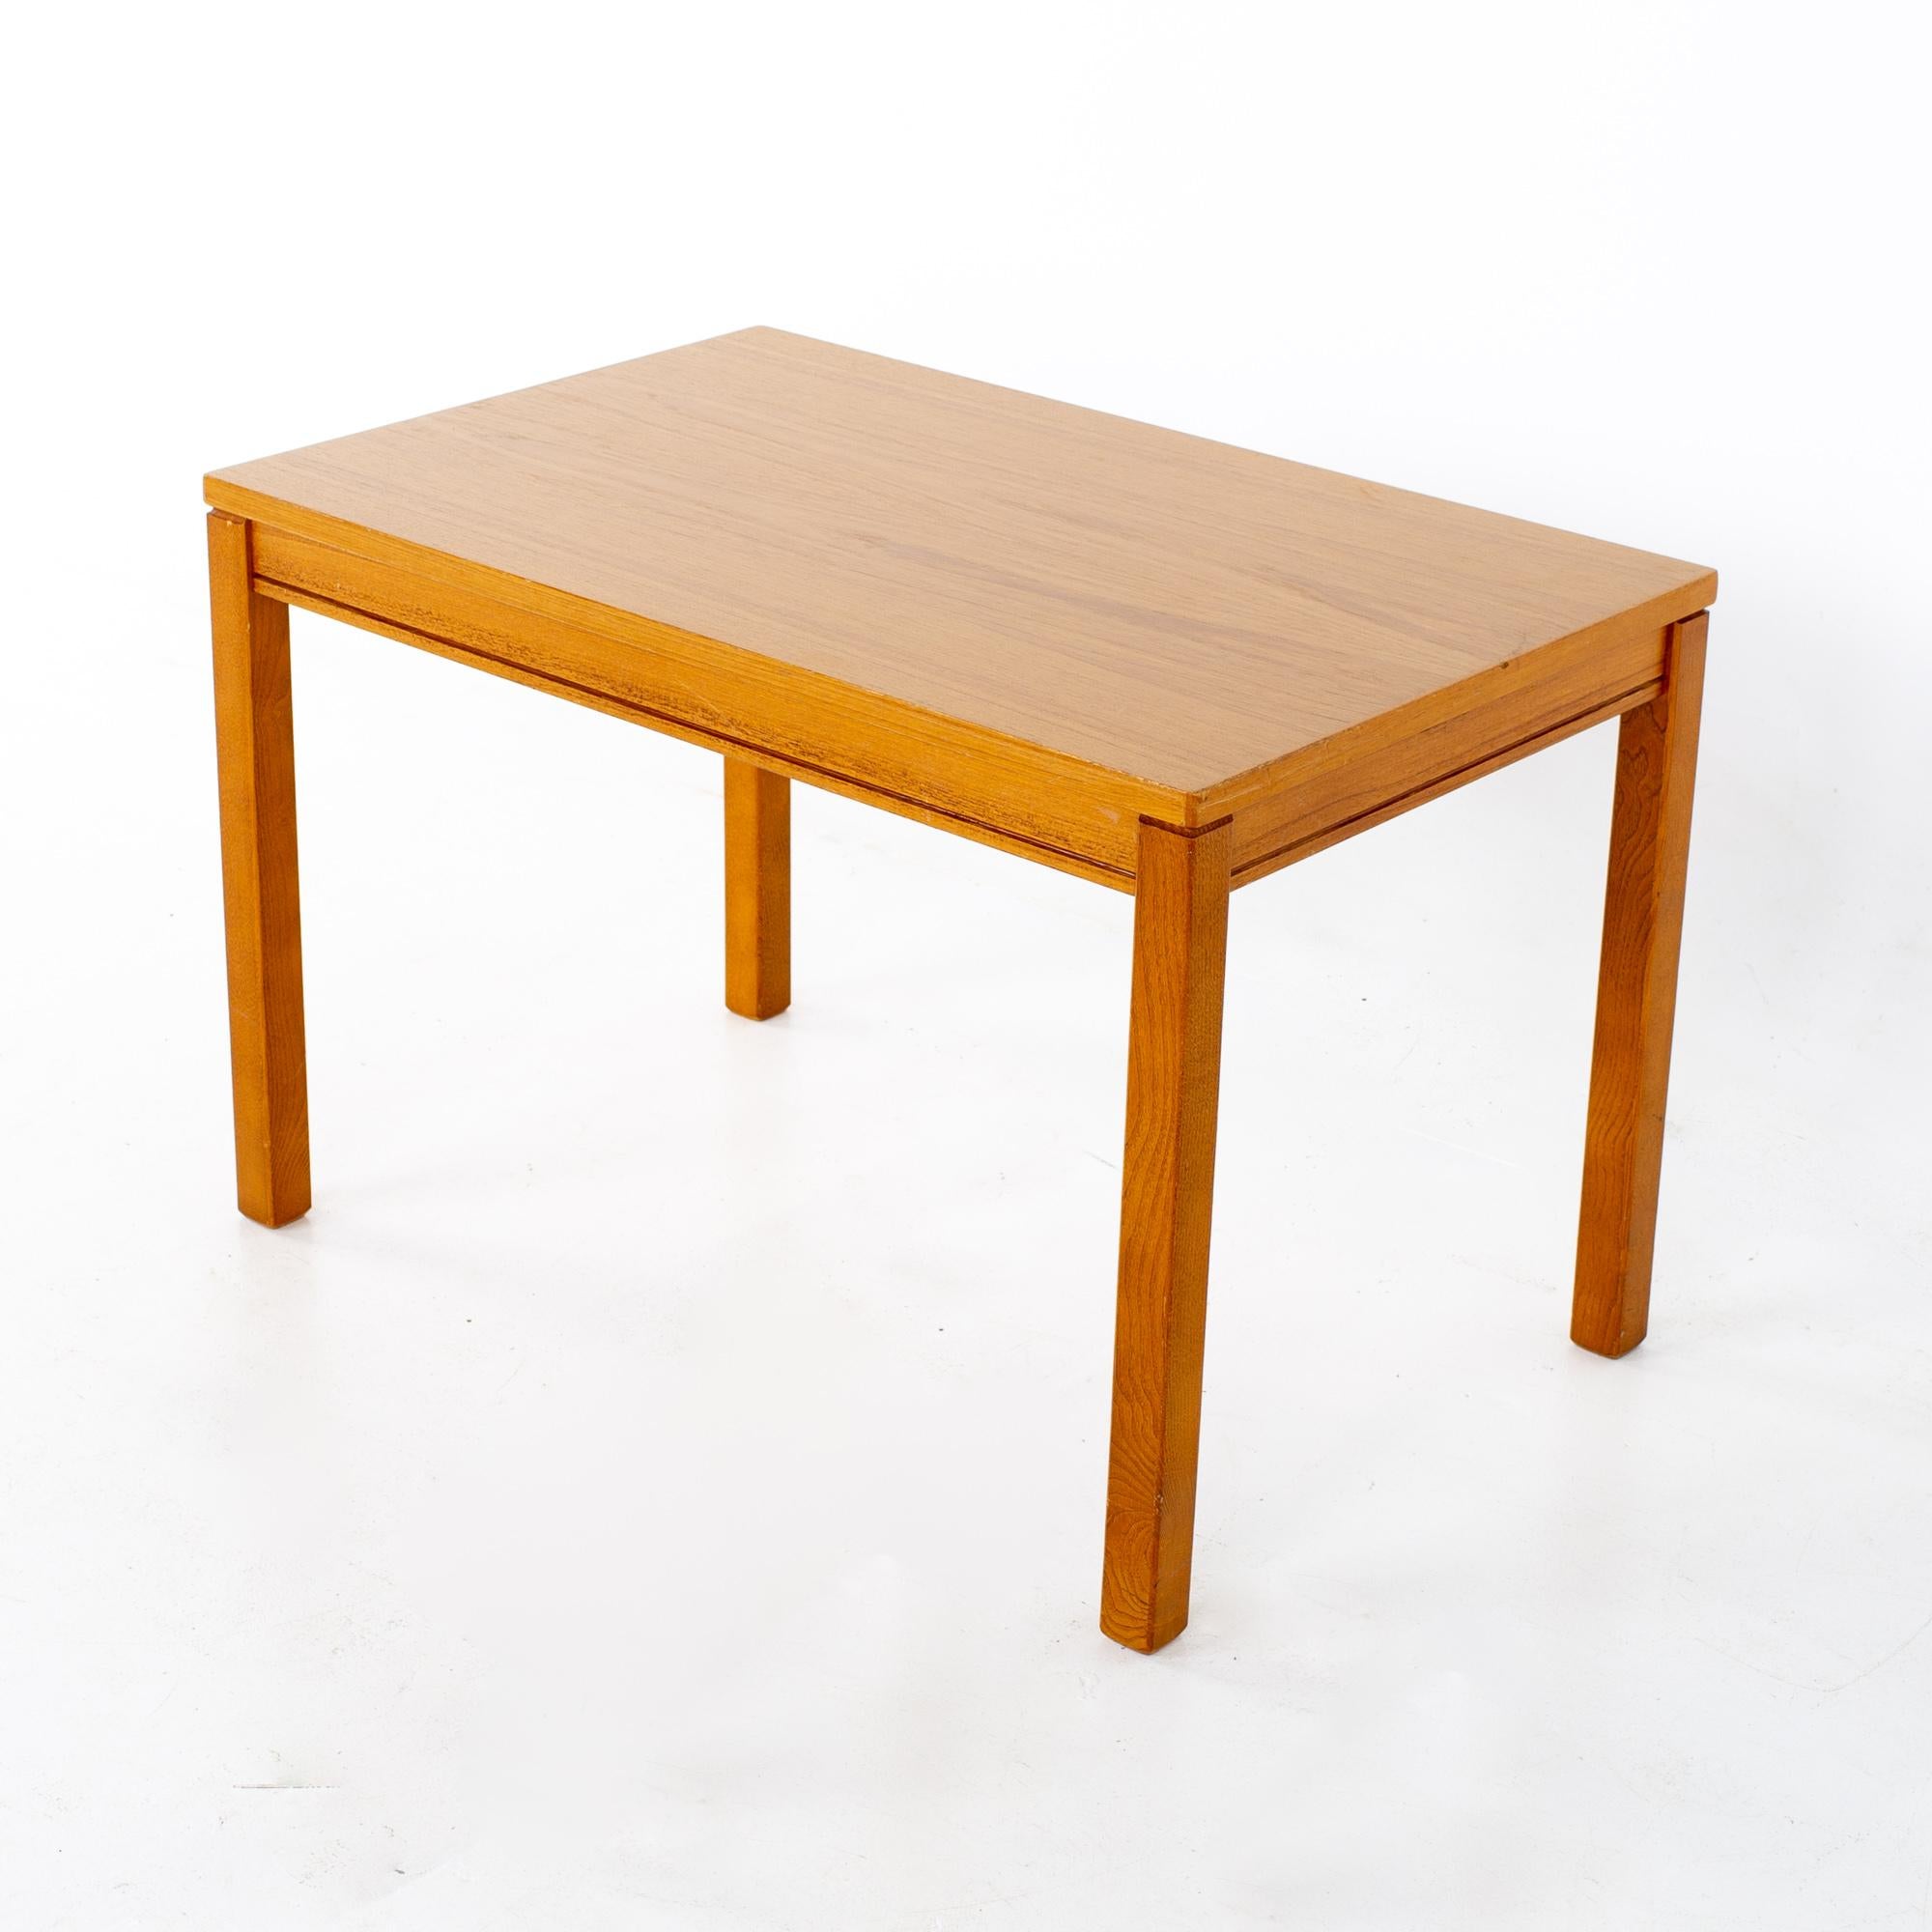 Heggen Mid Century Teak Side End Table

 This table measures: 27.5 wide x 17.5 deep x 18 inches high

All pieces of furniture can be had in what we call restored vintage condition. That means the piece is restored upon purchase so it’s free of